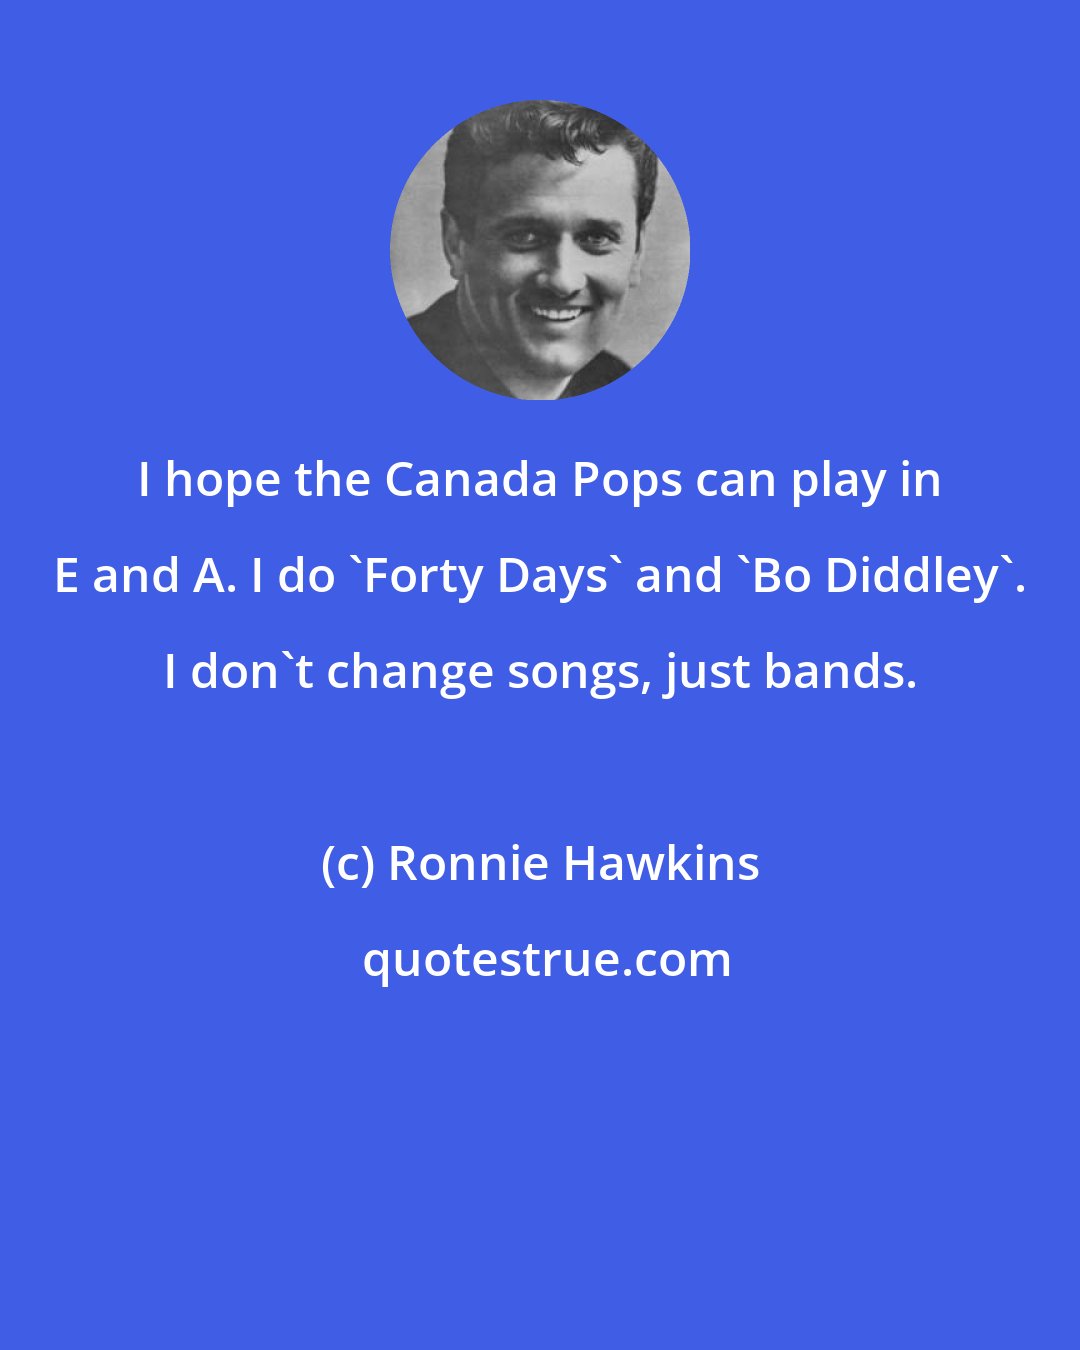 Ronnie Hawkins: I hope the Canada Pops can play in E and A. I do 'Forty Days' and 'Bo Diddley'. I don't change songs, just bands.